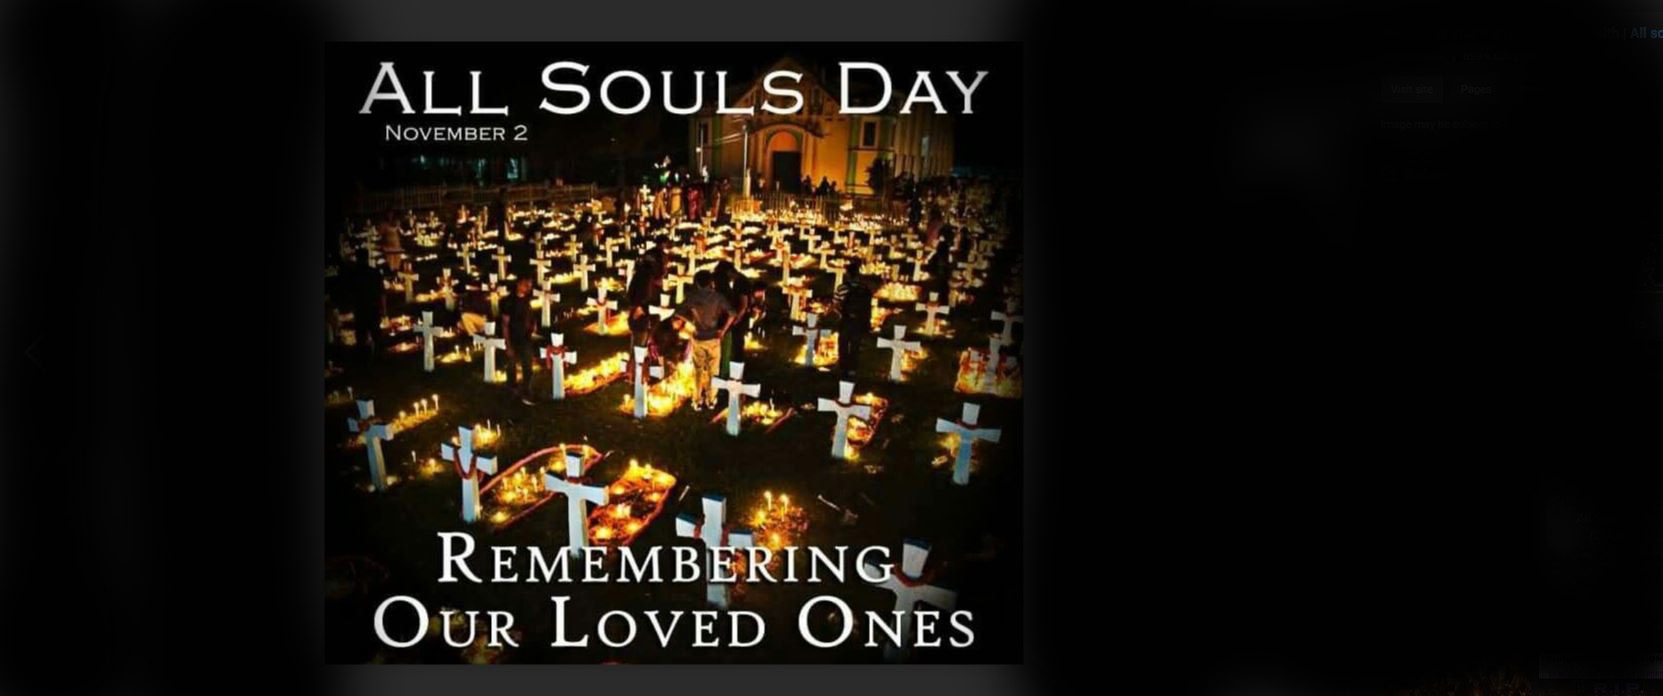 All Souls’ Day Mass of Remembrance & Envelopes